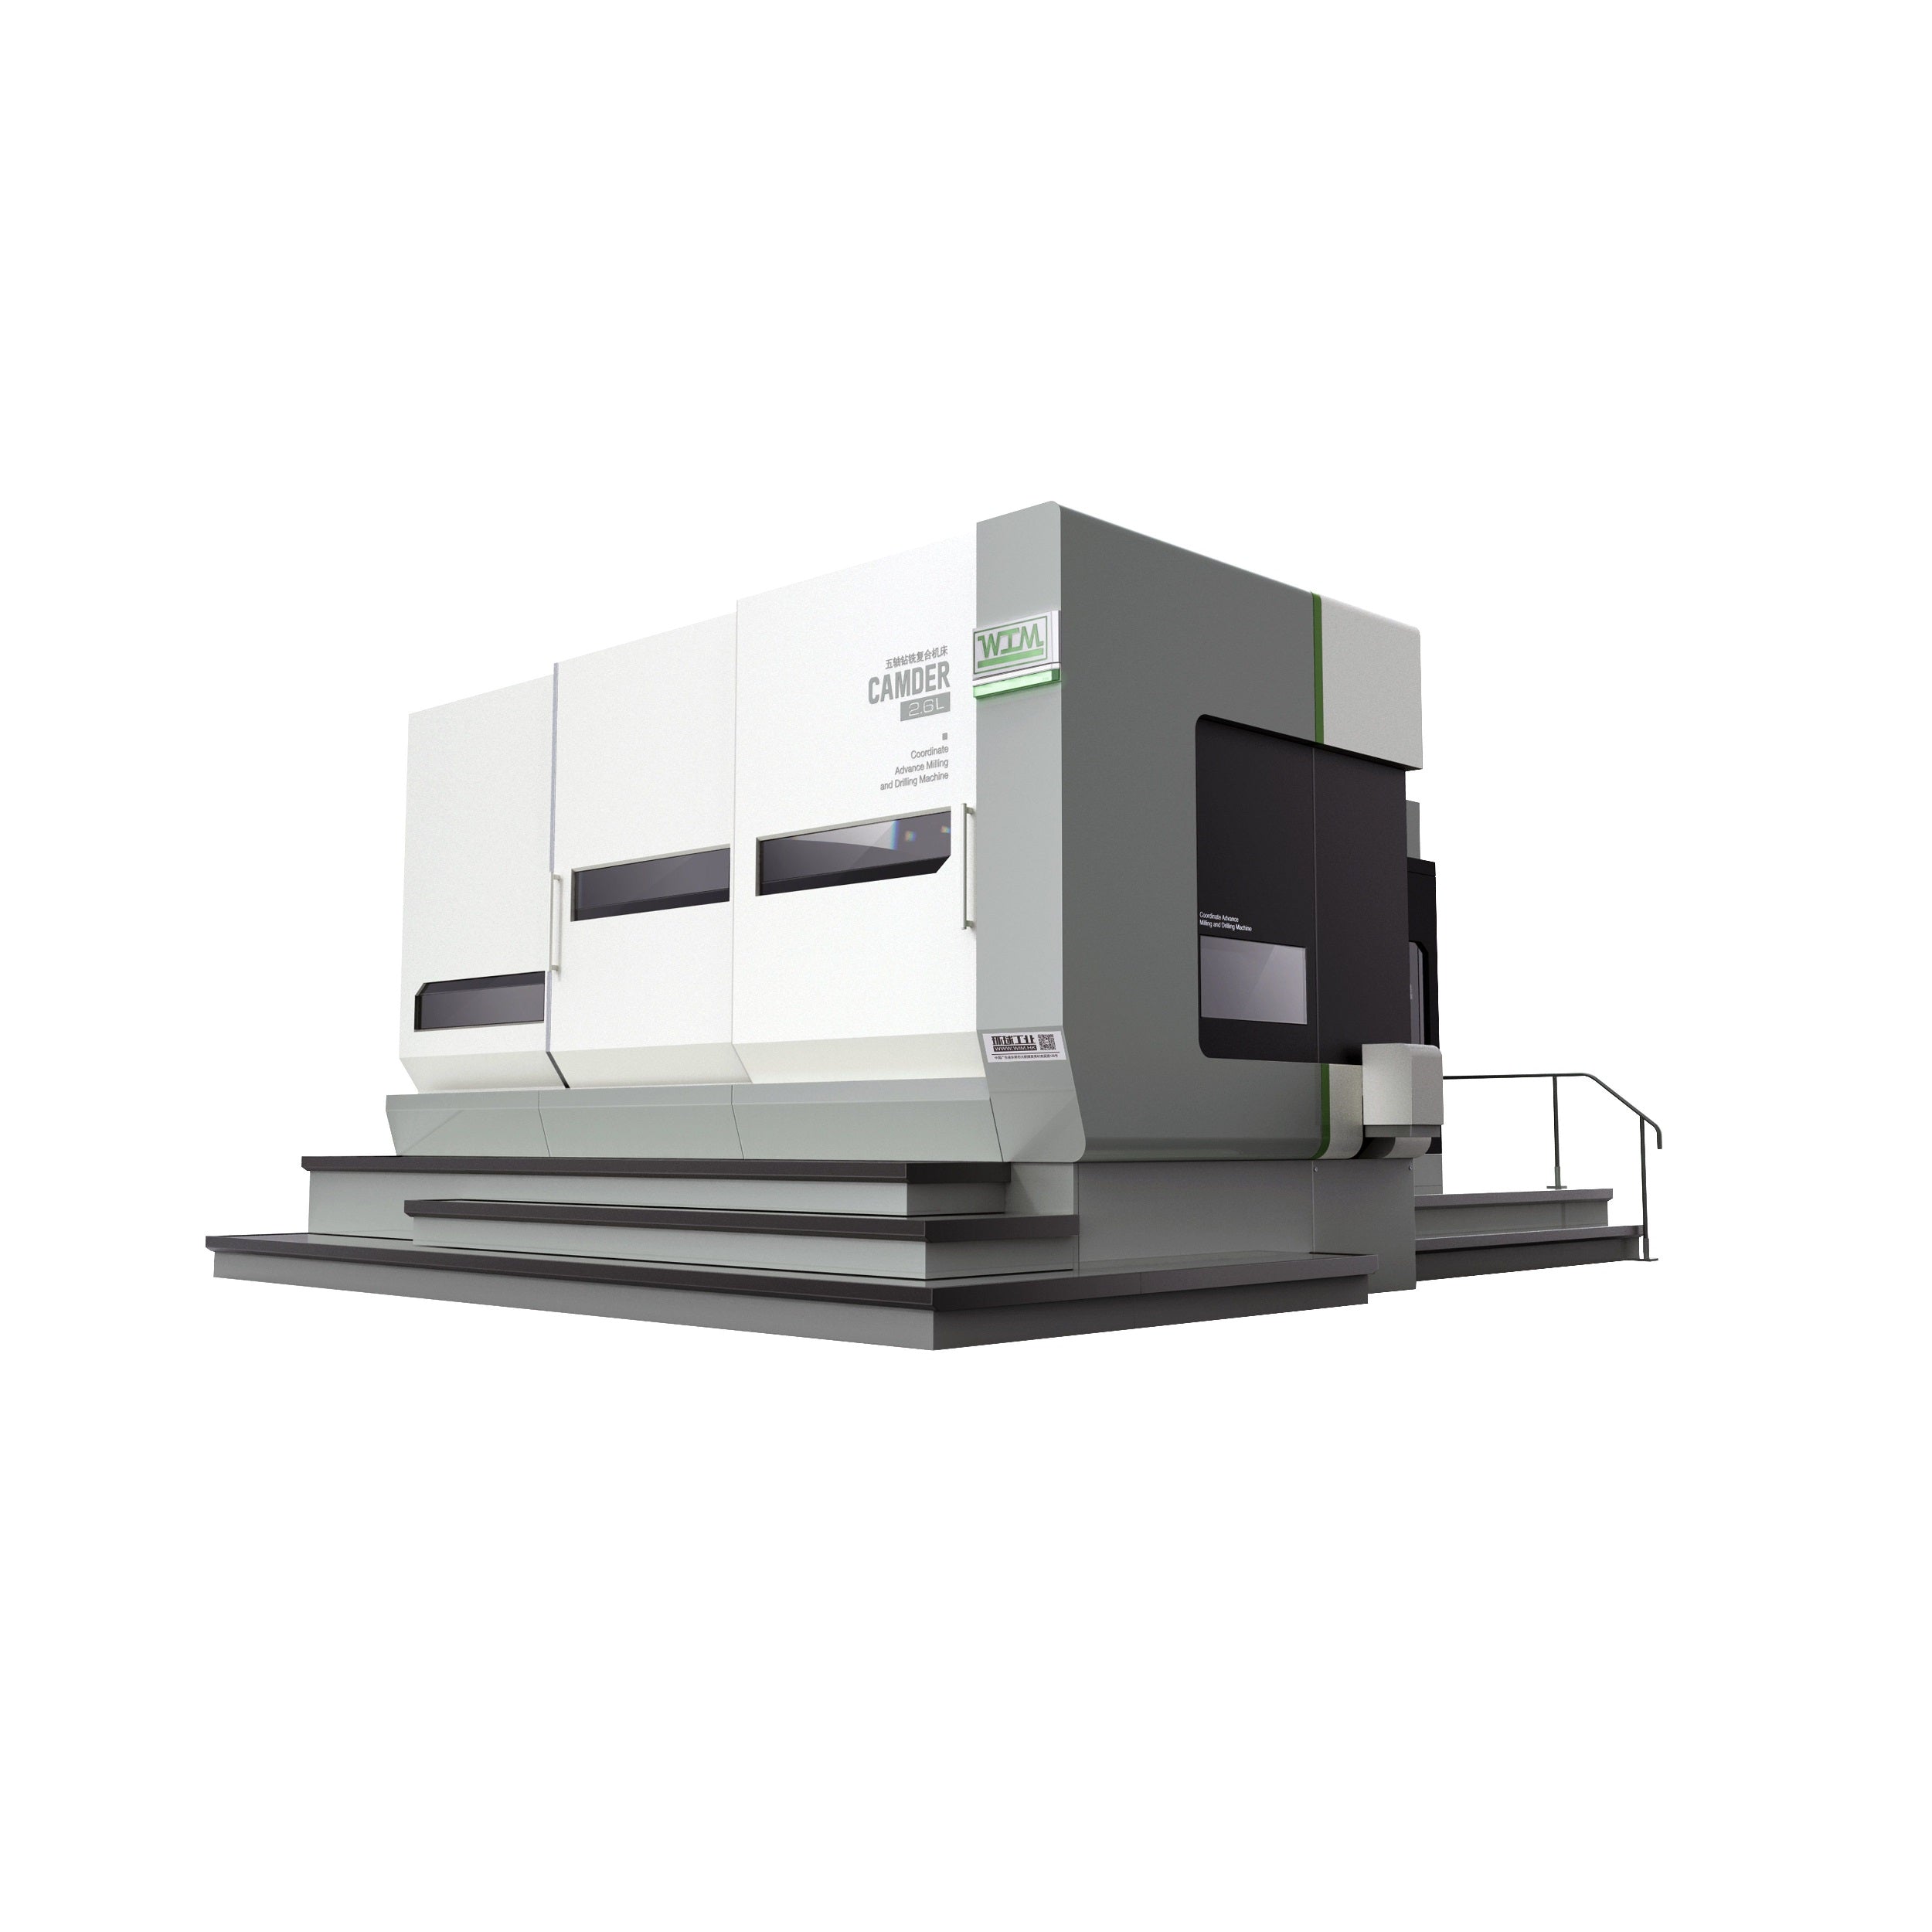 WIM 6-Axis Coordinate Advance Milling And Drilling Machine 2.6S